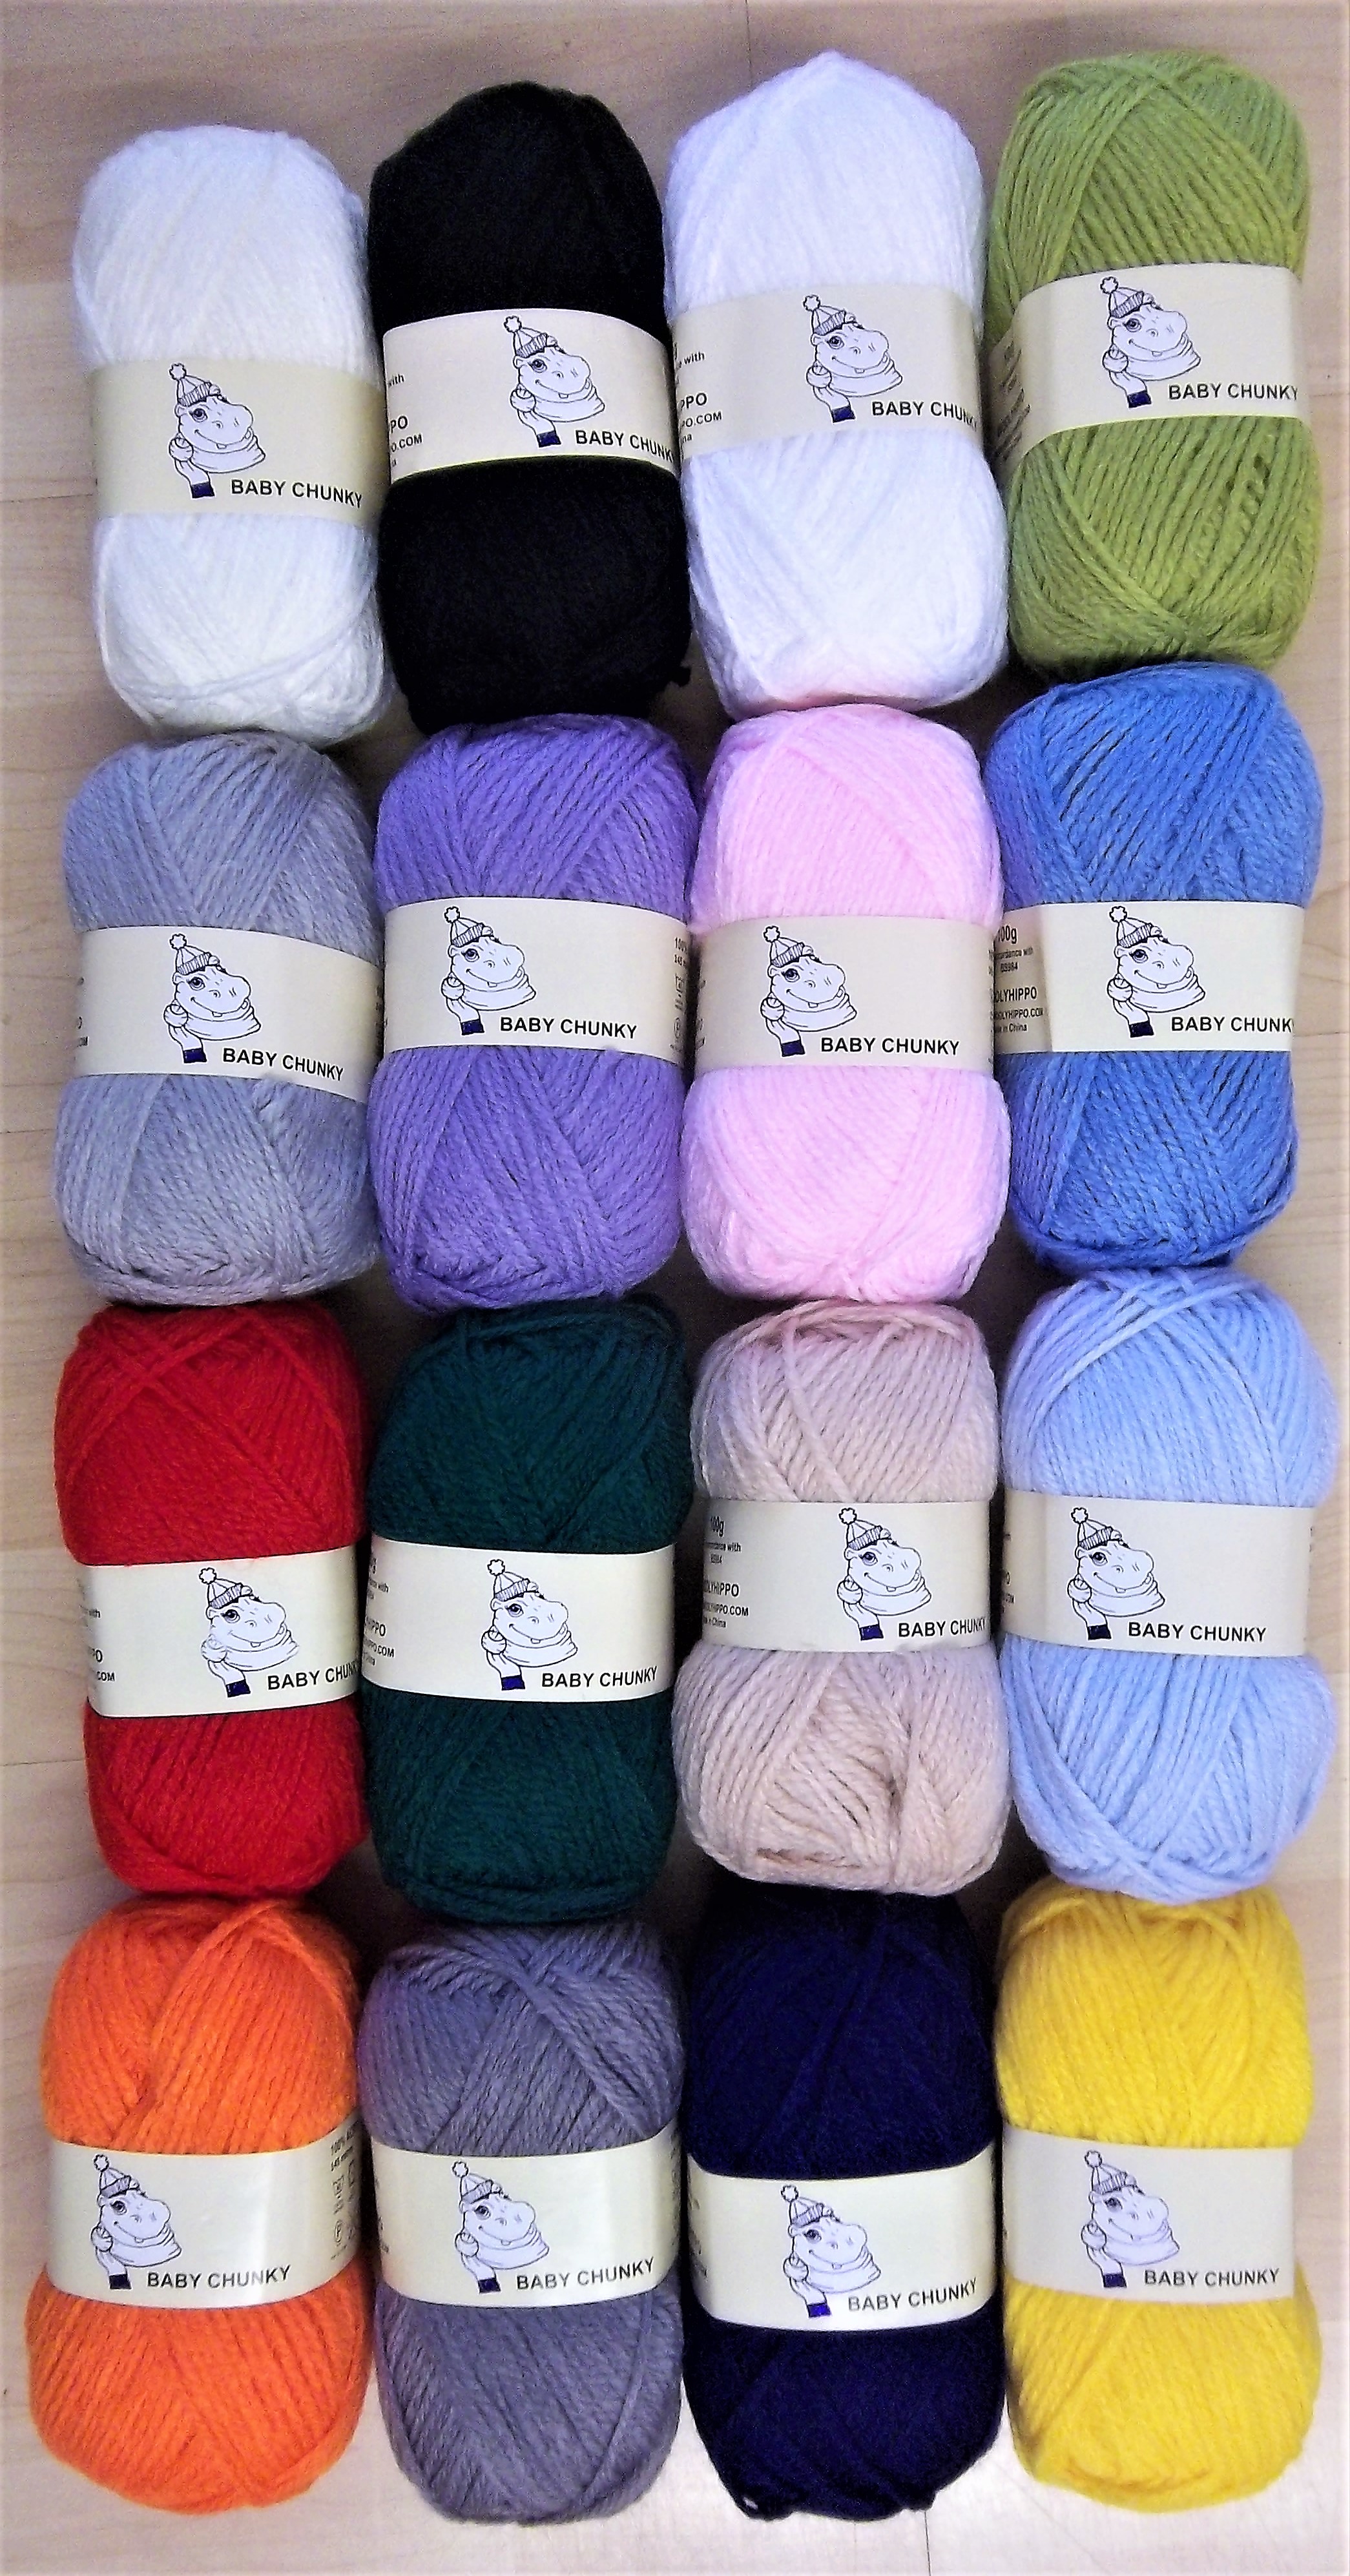 17 Types Of Yarn - For Crochet and Knitting